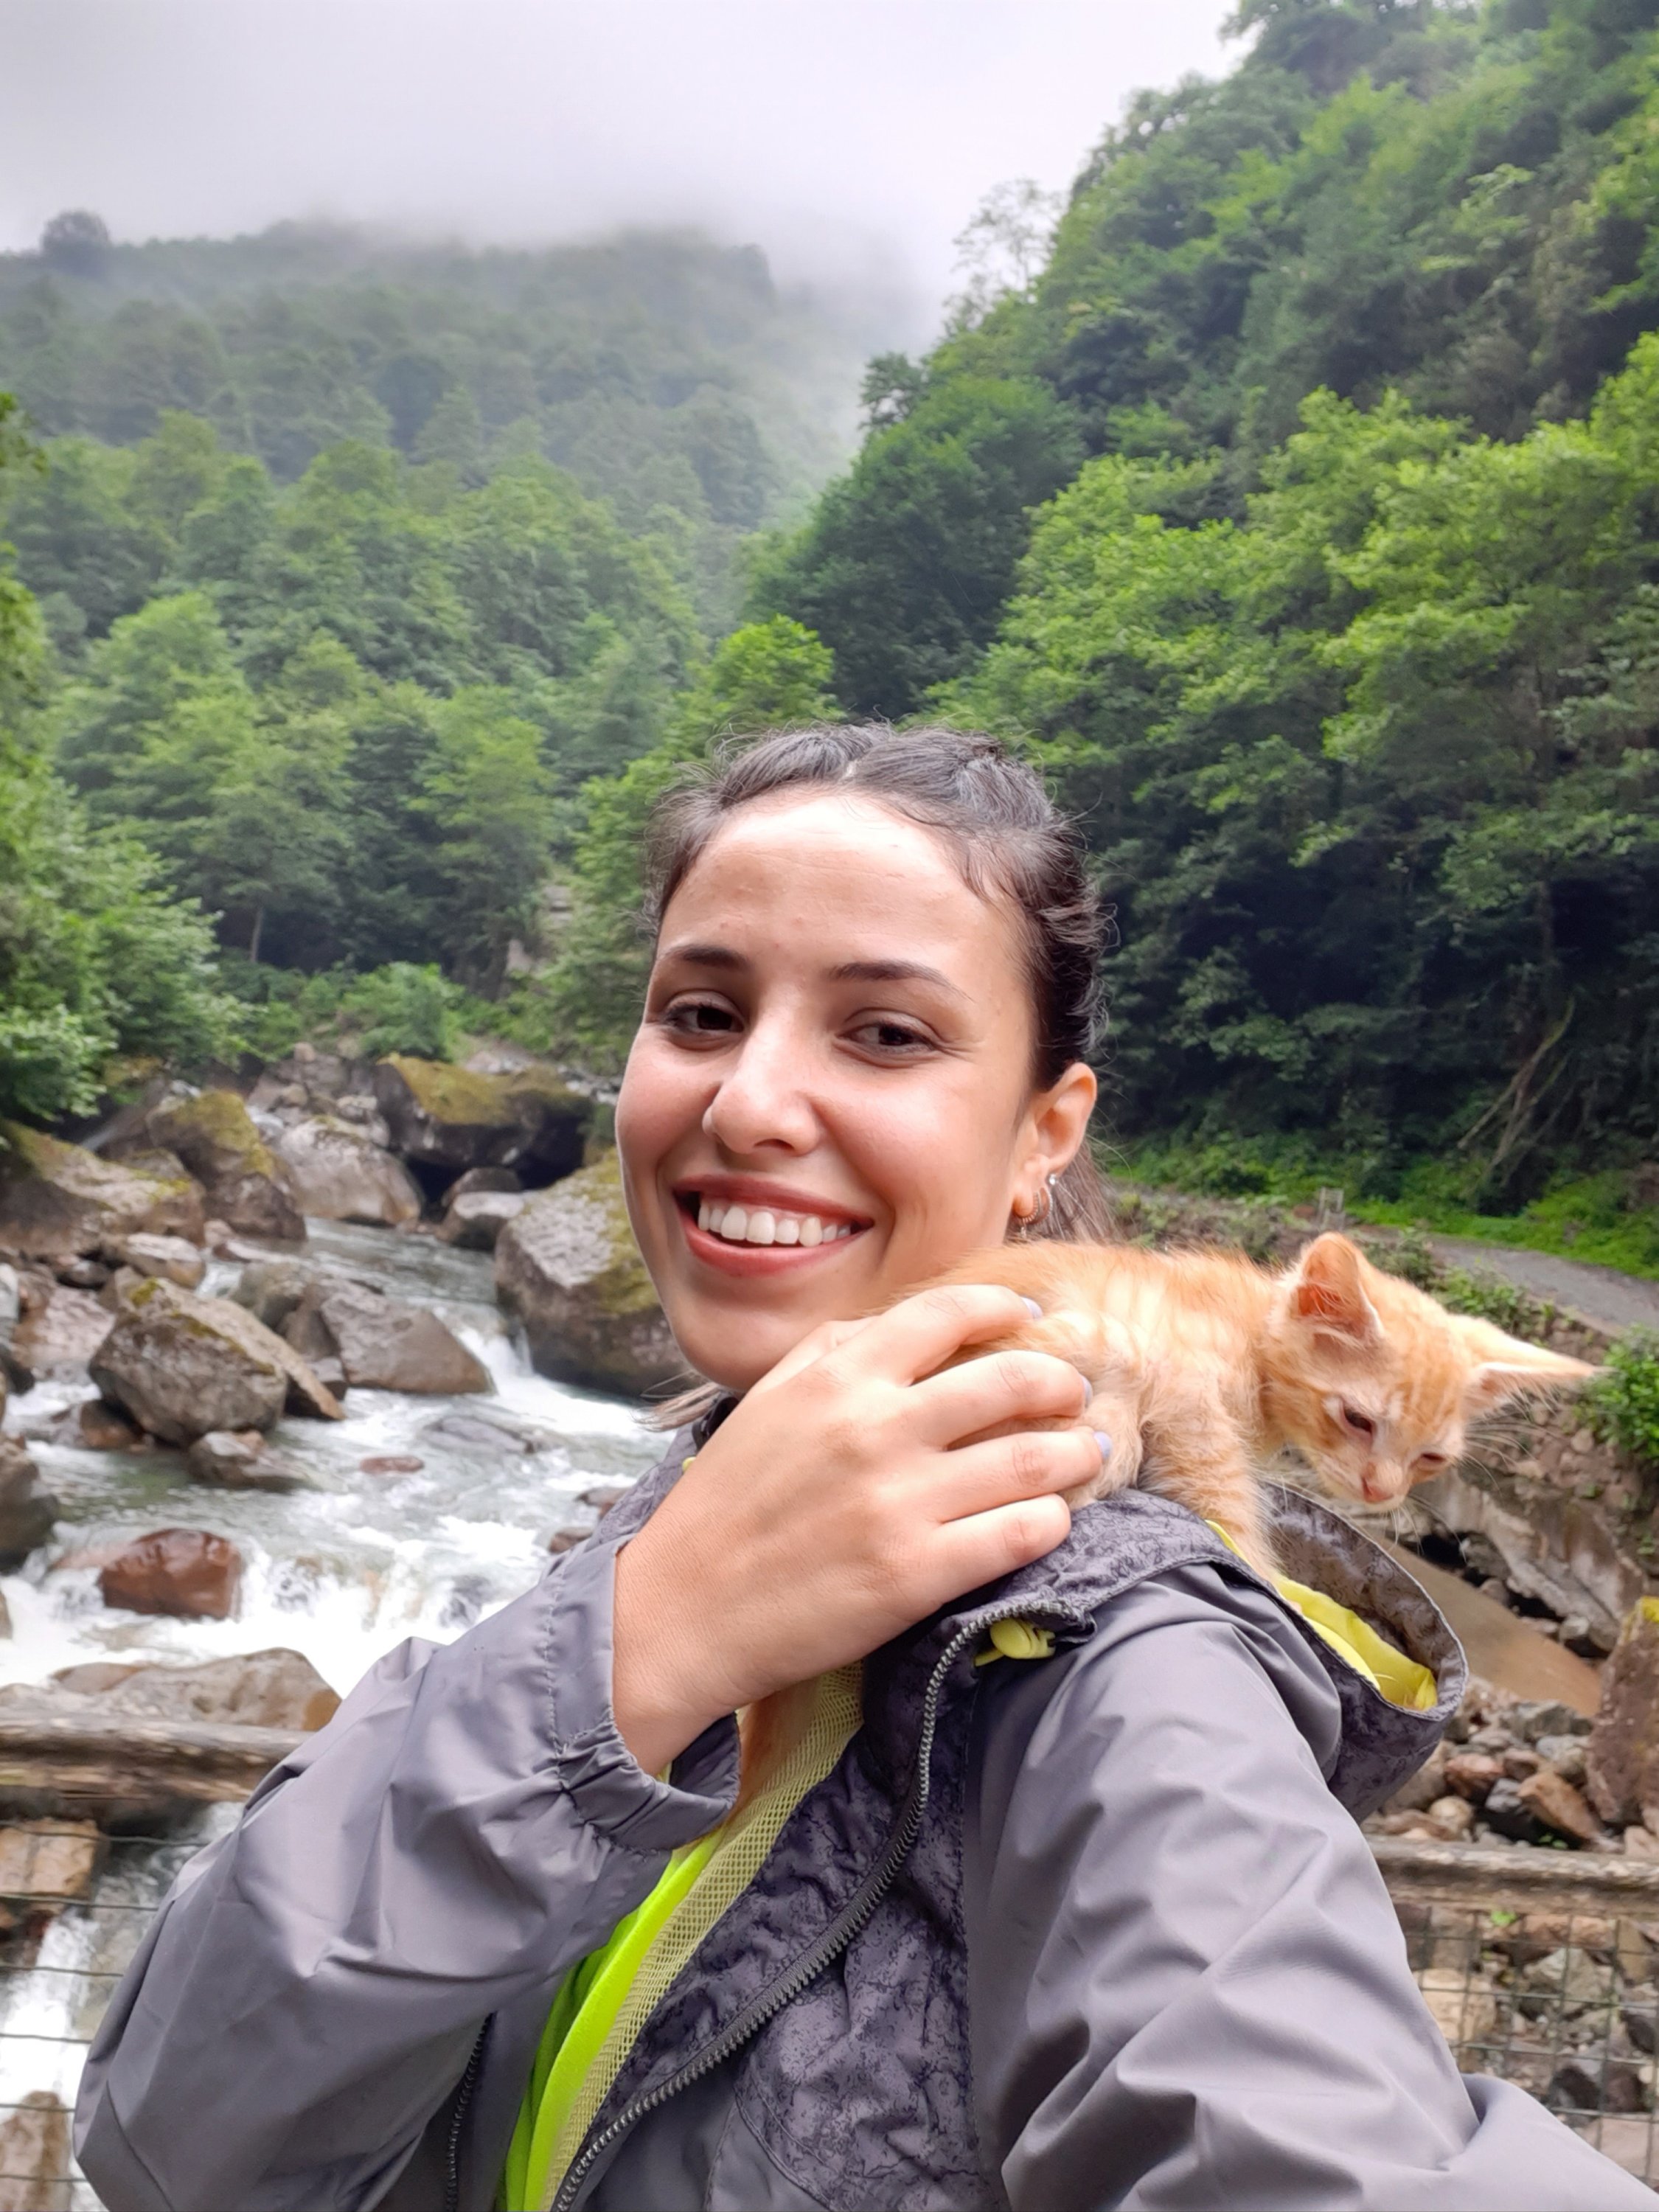 Özge Kübra Teymur poses for a photo with her cat Azman resting on her shoulder against a backdrop of forests and mountains, Rize, Turkey, April 20, 2021. (DHA Photo)